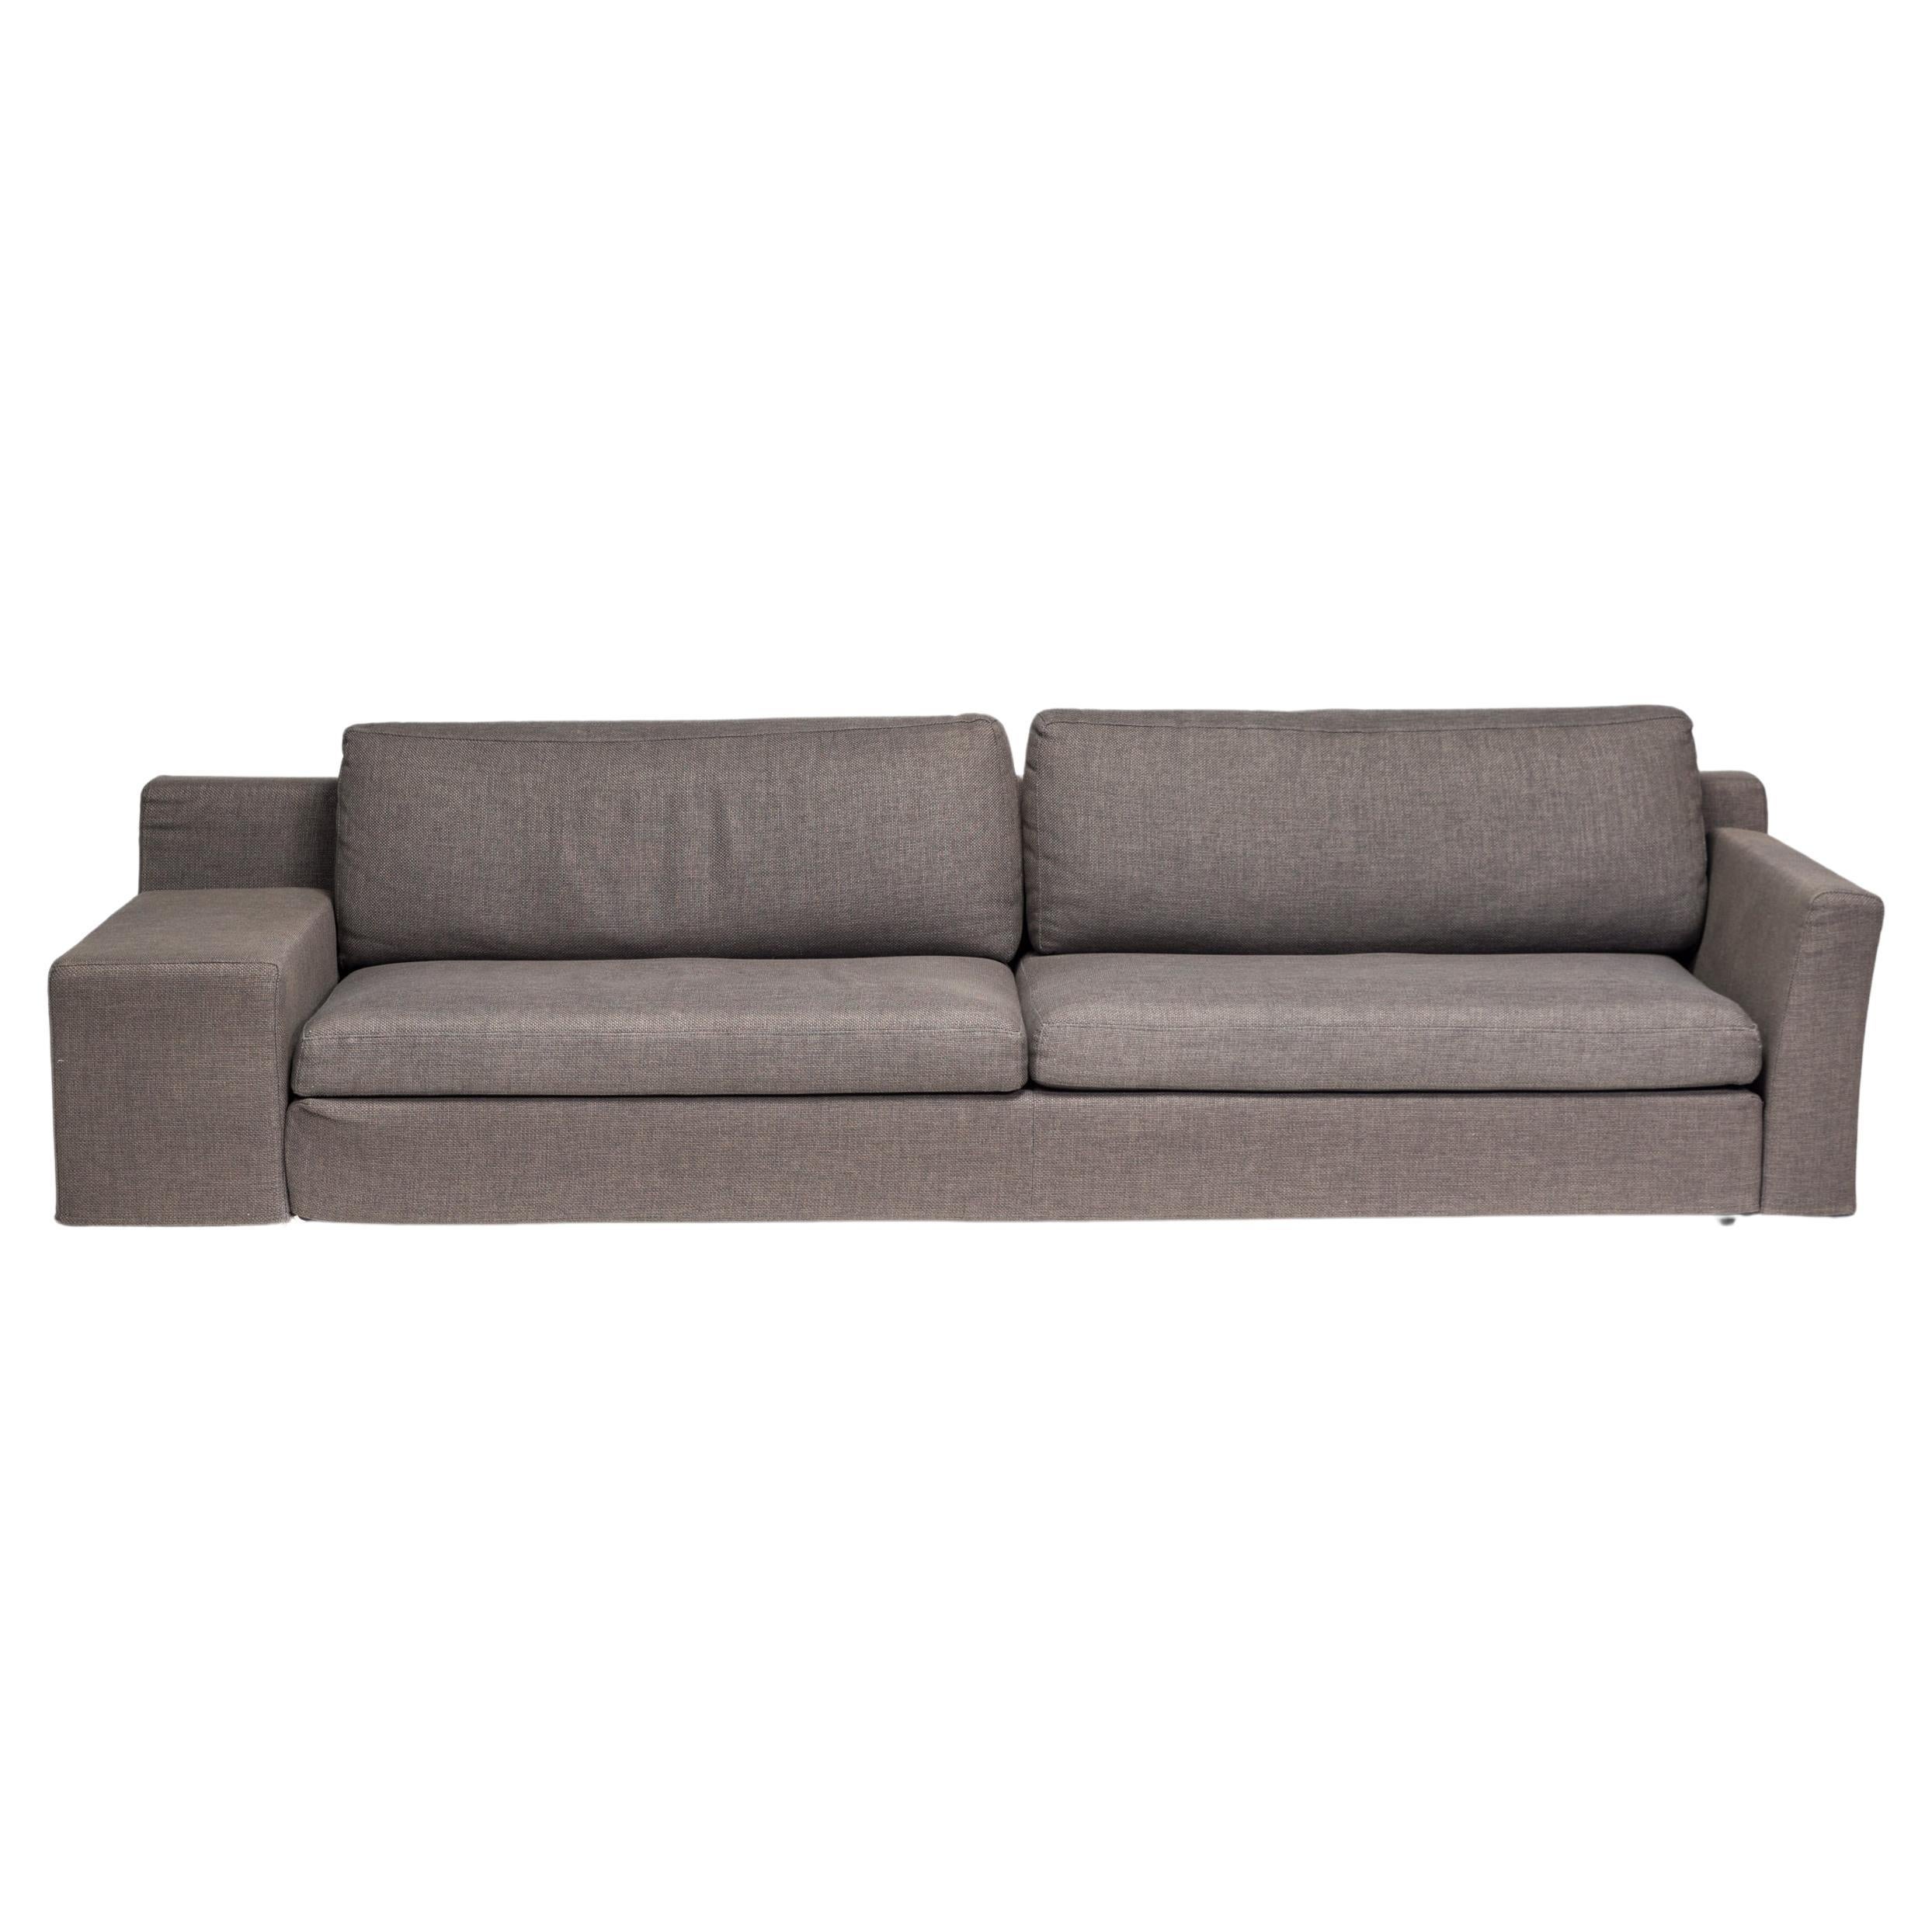 A fantastic example of contemporary design, this Mister sofa is designed by Philippe Starck for Cassina.

The sofa has a low back and deep seating, fully upholstered in dark grey woven fabric.

The sofa has an asymmetric silhouette, with one armrest